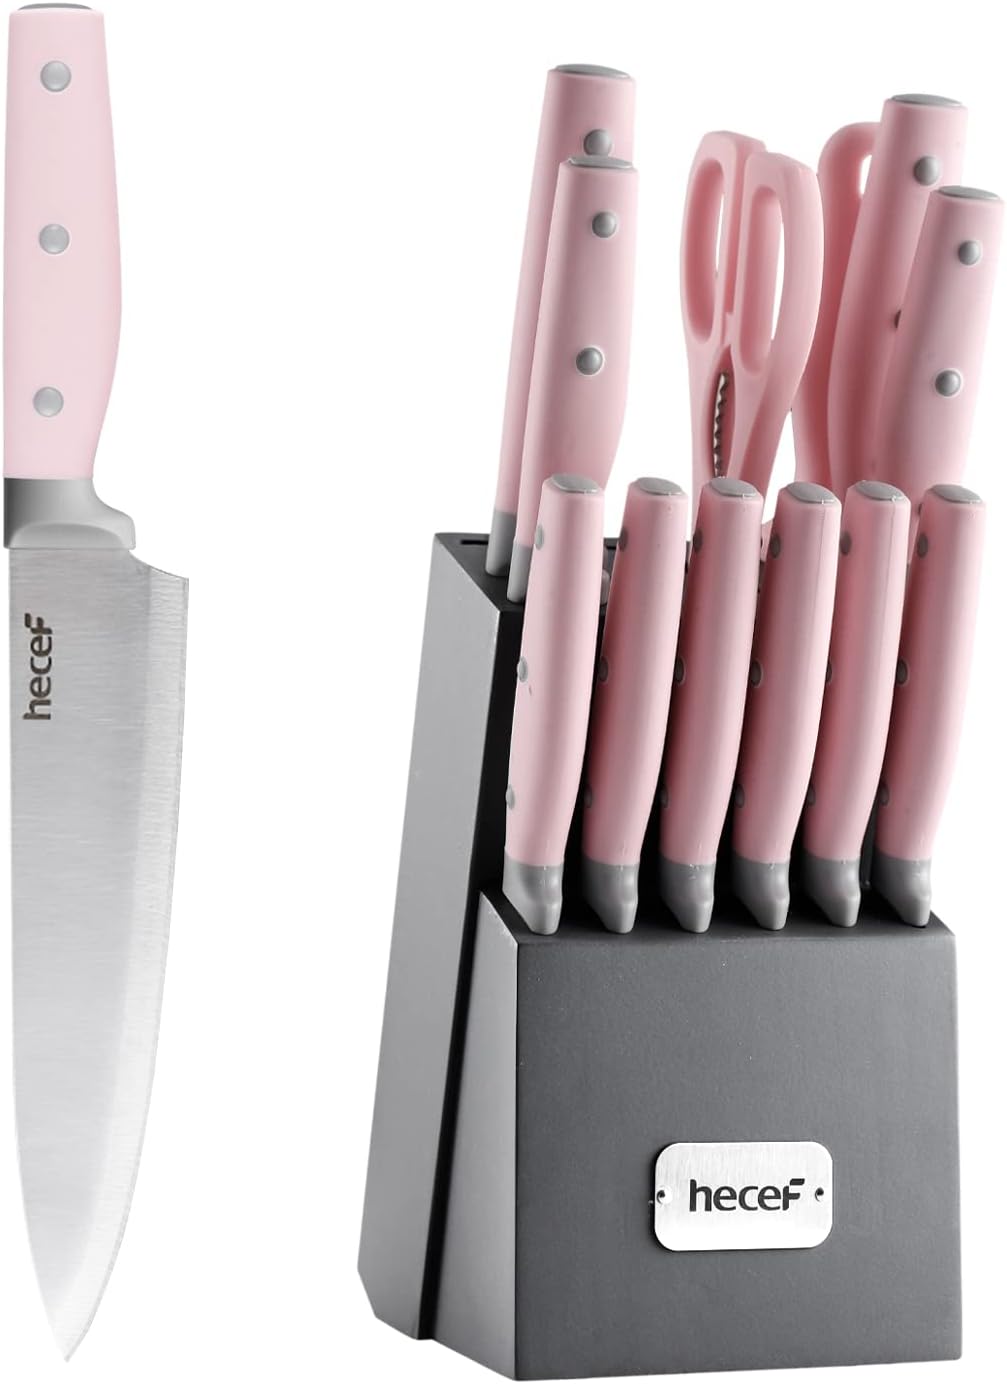 hecef Kitchen Knife Block Set, 14 Pieces Set with Wooden Block  Sharpener Steel  All-purpose Scissors, High Carbon Stainless Steel Cutlery Set, Mothers Day Gift Housewarming Birthday (Pink)